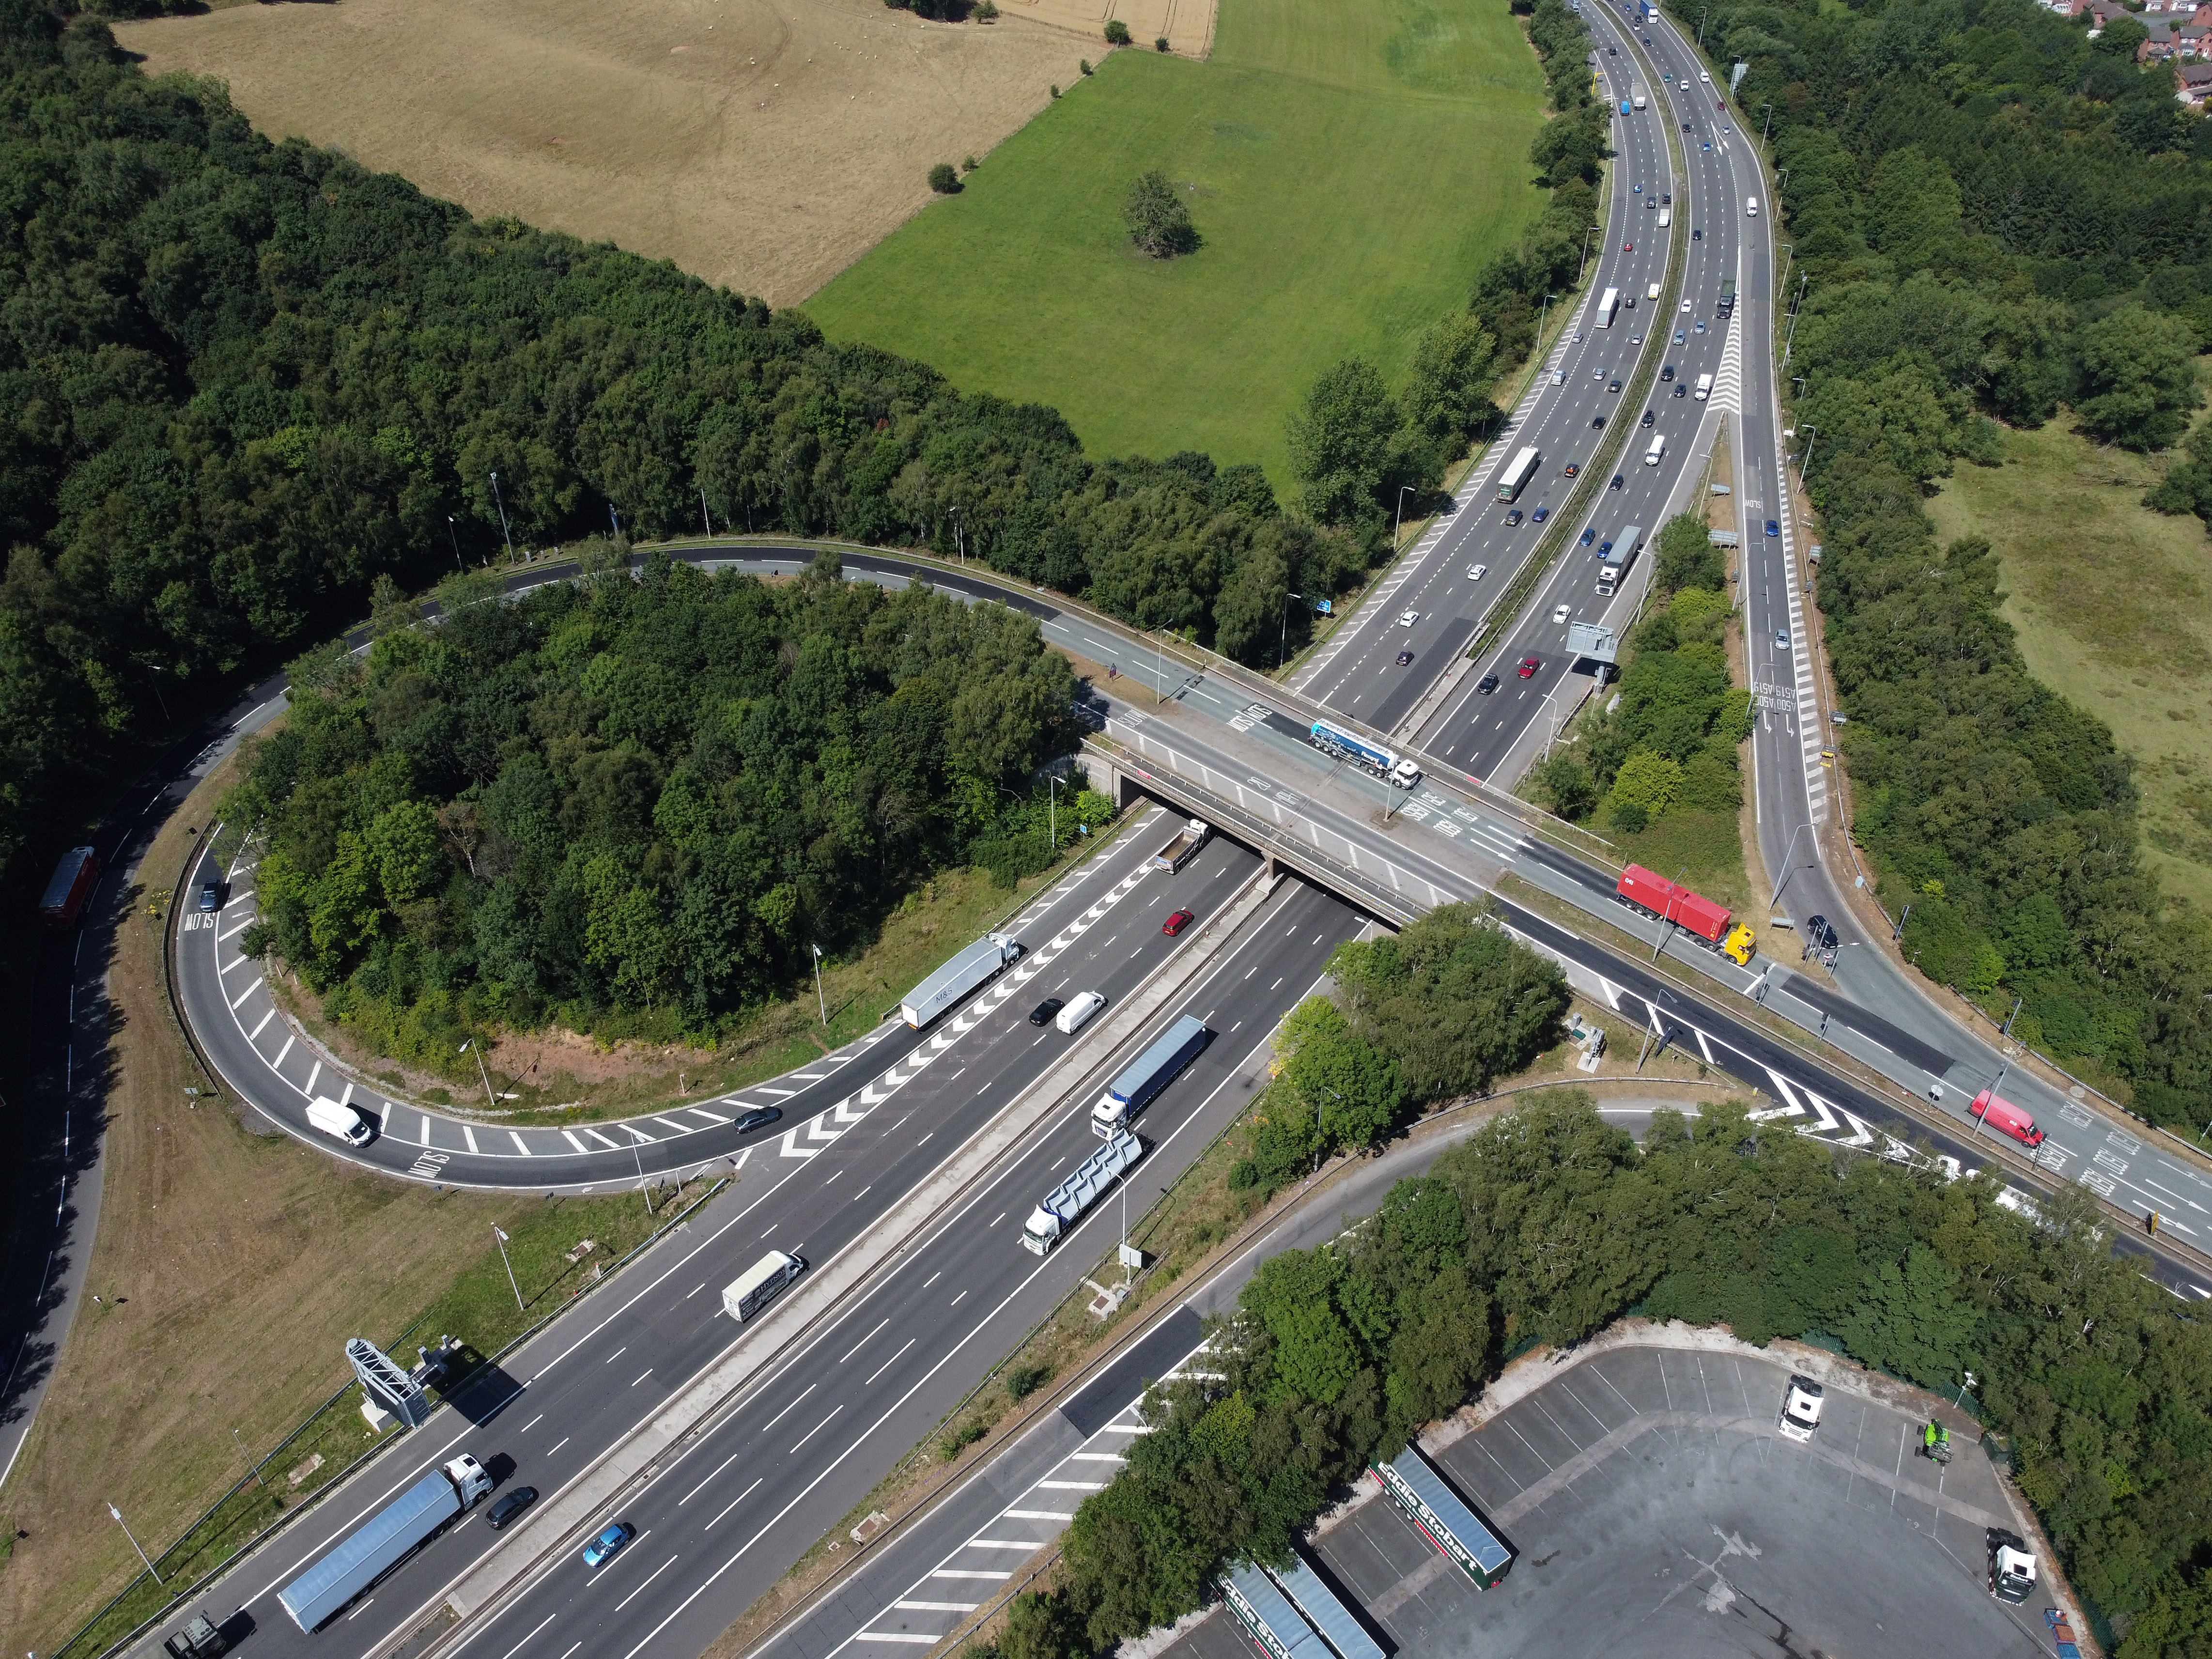 Consumer research conducted by Midlands Connect shows massive support for improvements on Junction 15 of the M6